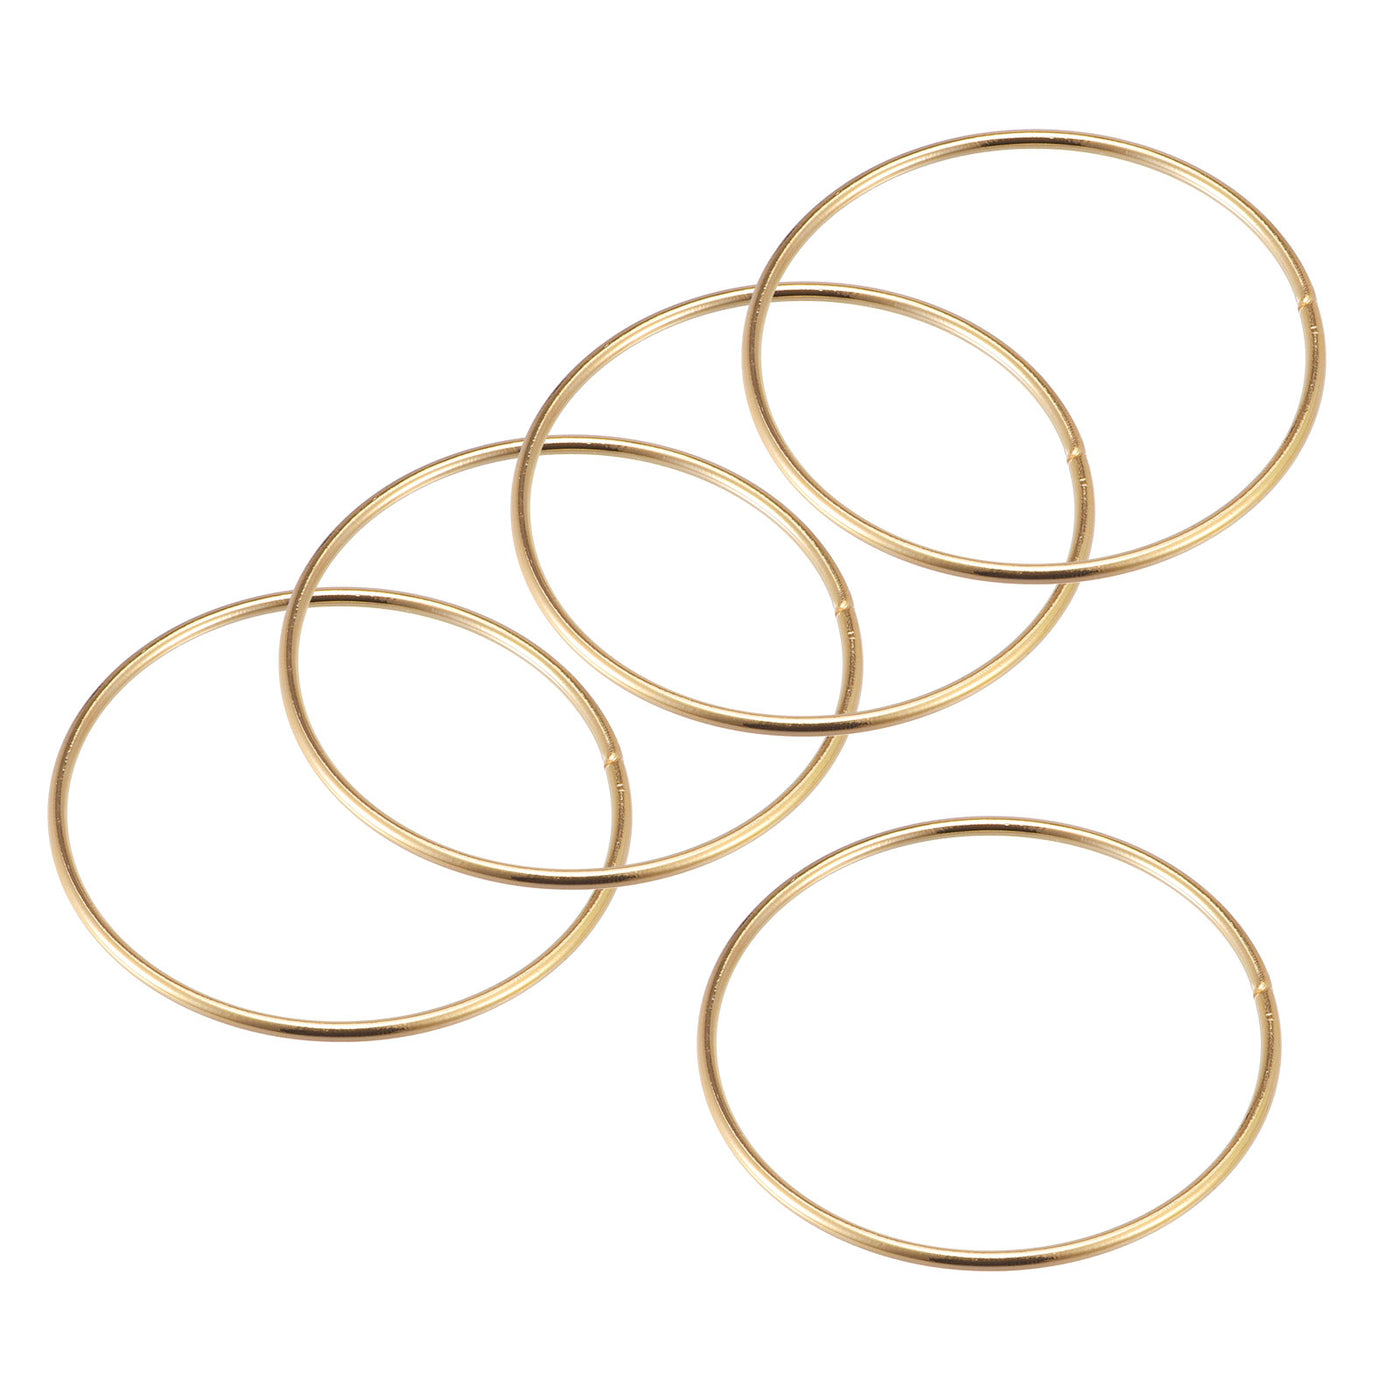 uxcell Uxcell 75mm(2.95") OD Metal O Ring Non-Welded Craft Hoops for DIY Gold Tone 5pcs